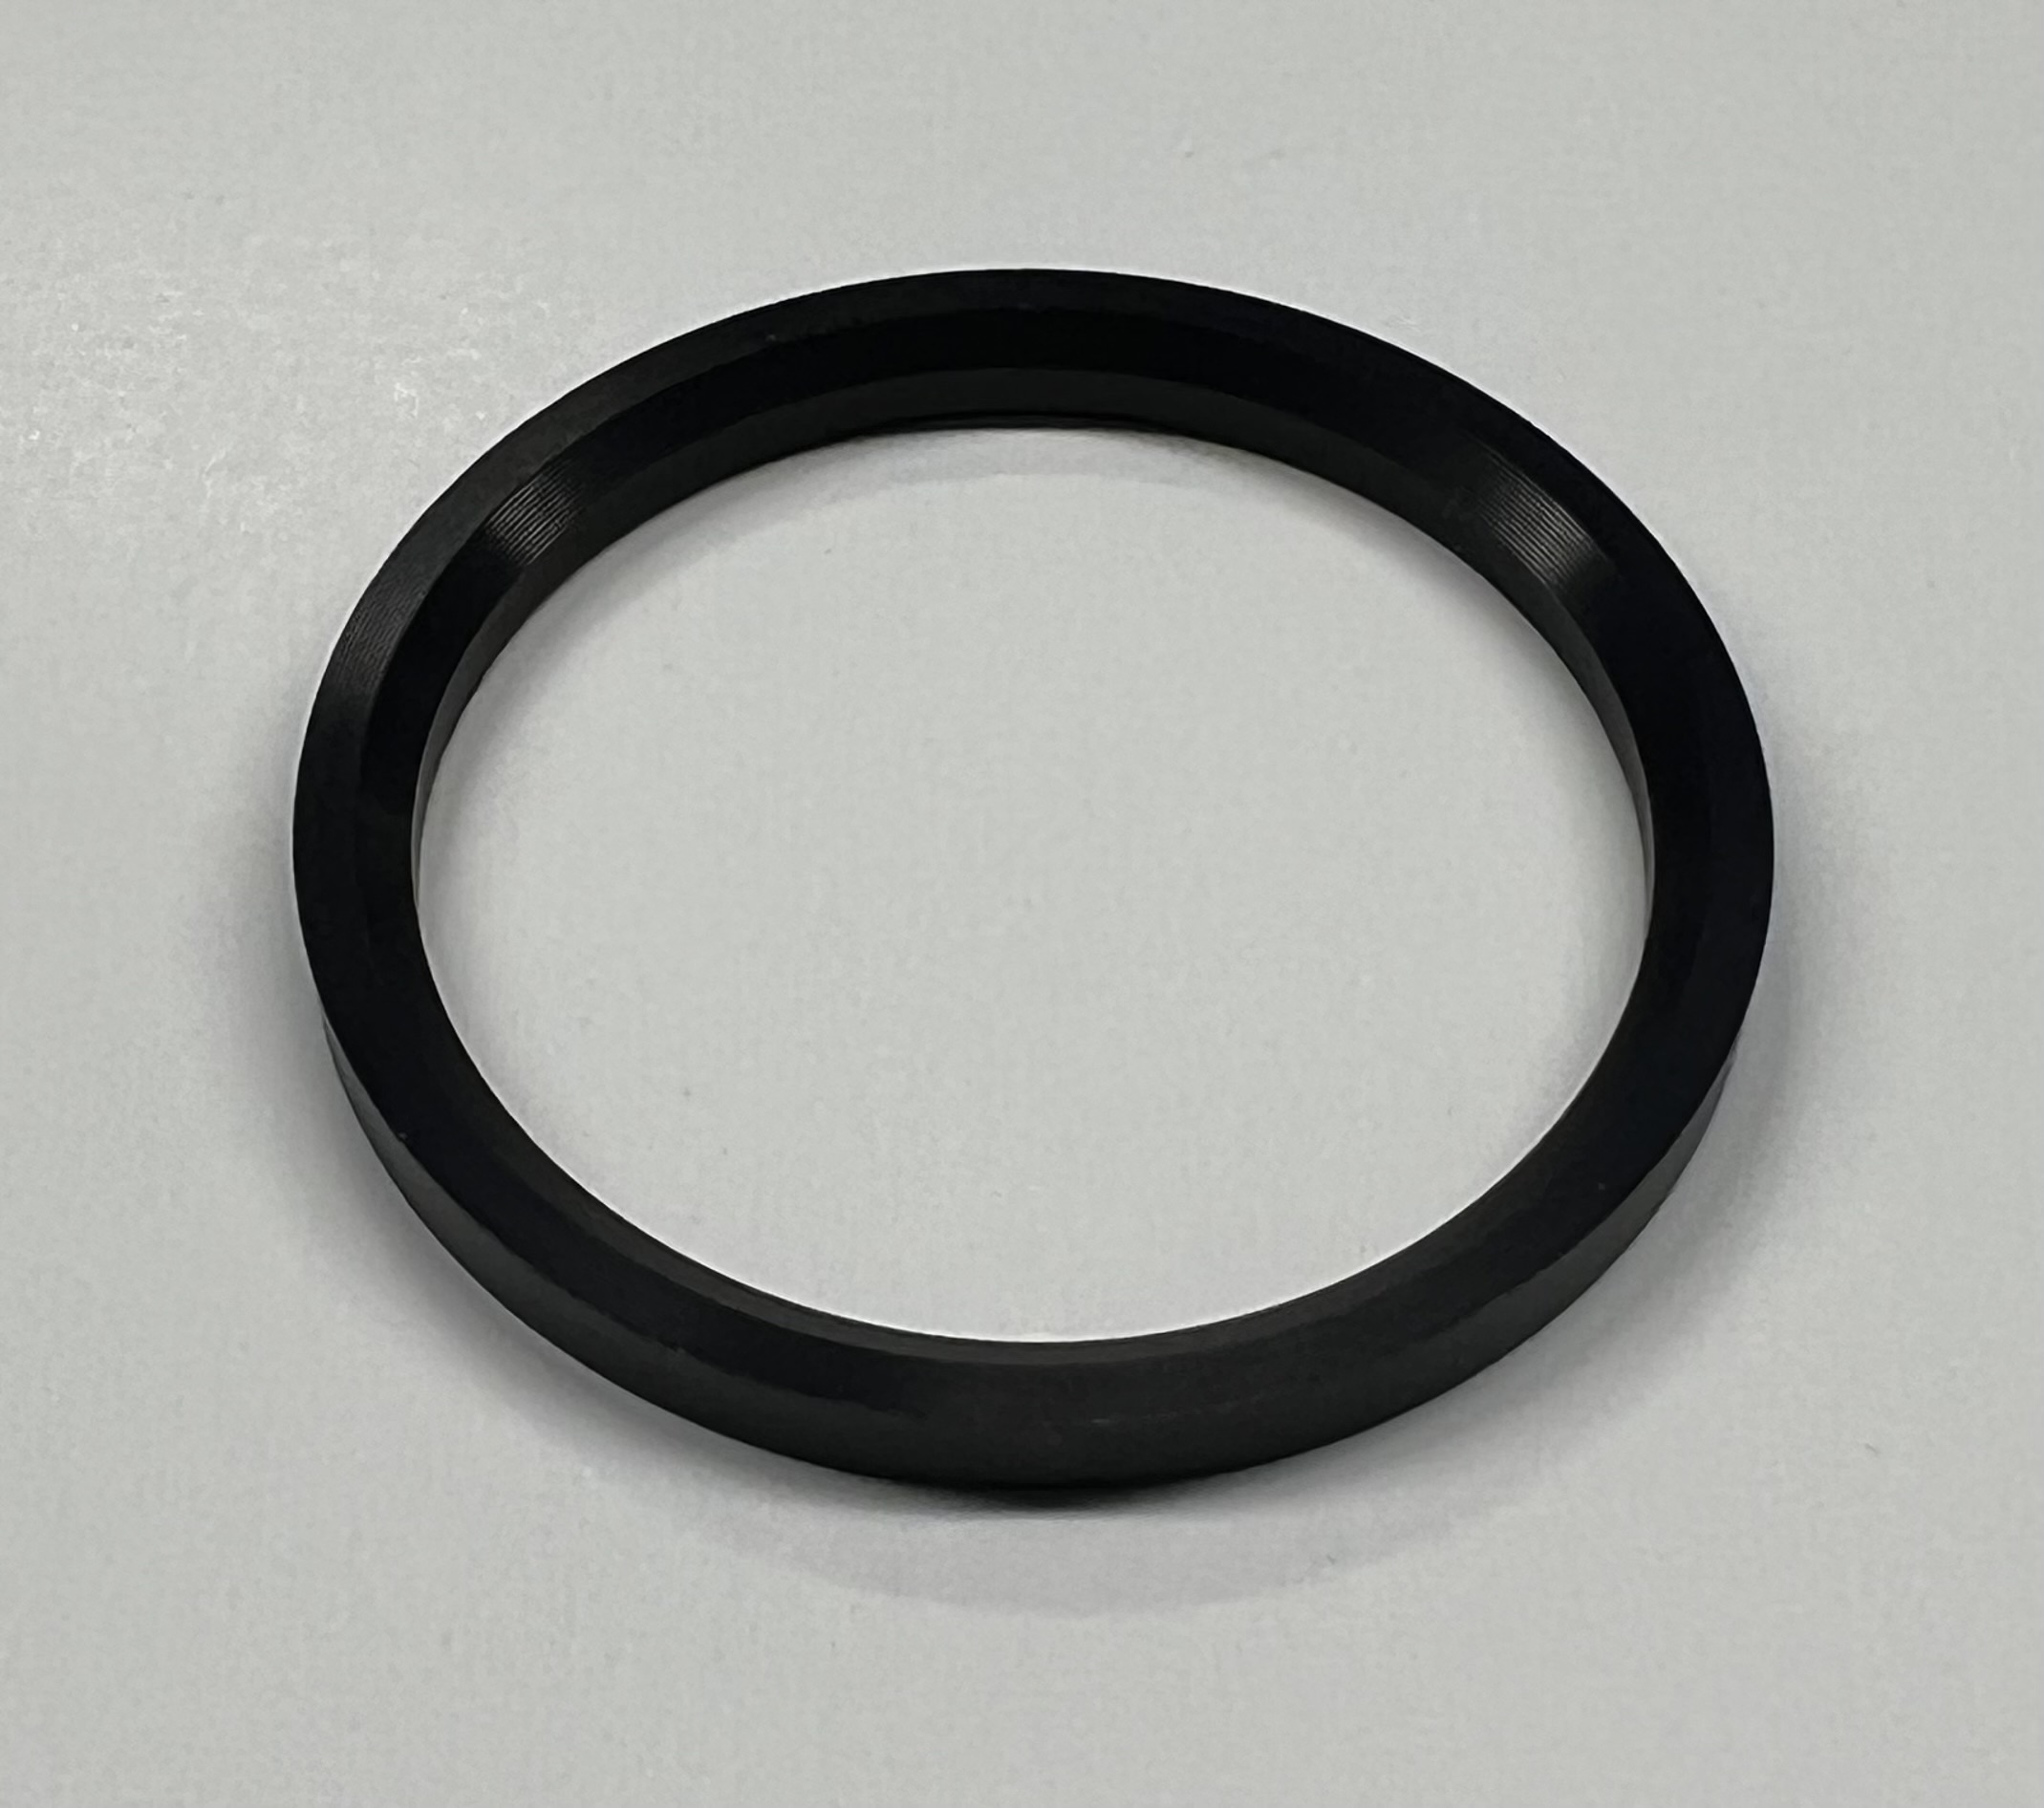 1/8` axle spacer